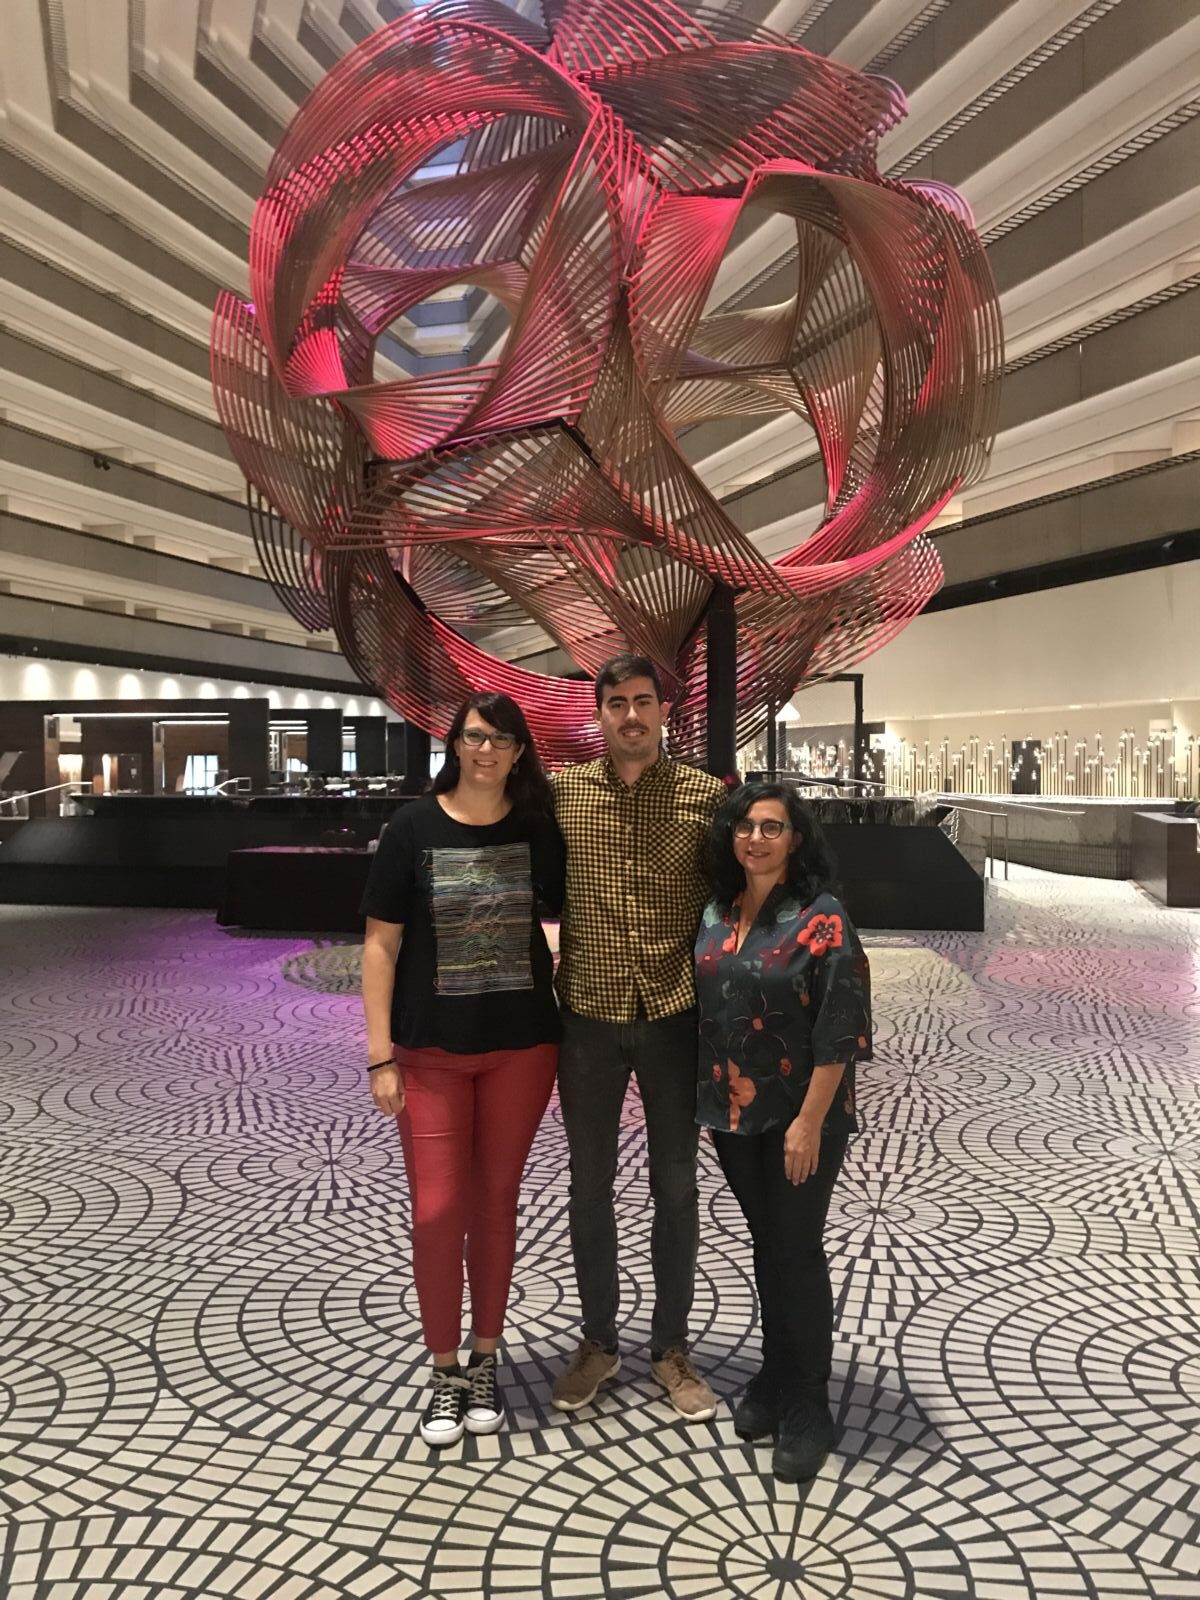 Three people stand together in a patterned lobby with a large, abstract red sculpture in the background.